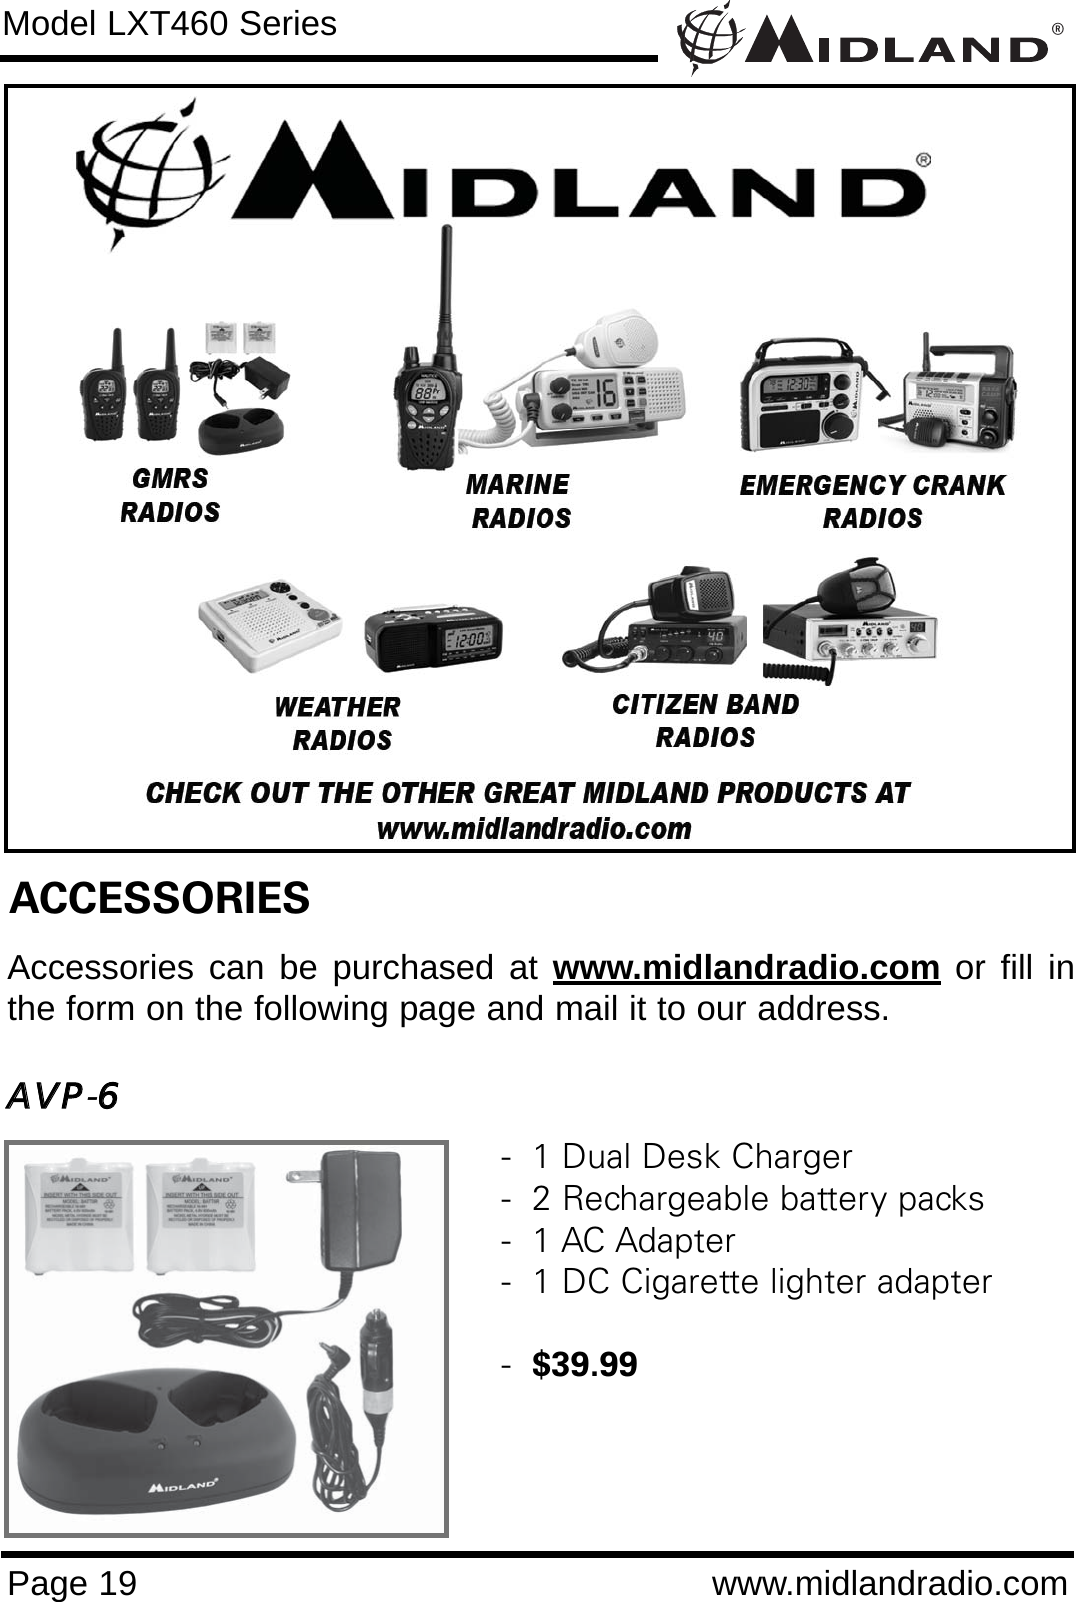 ®Page 19 www.midlandradio.comModel LXT460 SeriesACCESSORIESAccessories can be purchased at www.midlandradio.com or fill inthe form on the following page and mail it to our address.AAVVPP-66-  1 Dual Desk Charger-  2 Rechargeable battery packs-  1 AC Adapter-  1 DC Cigarette lighter adapter-  $39.99